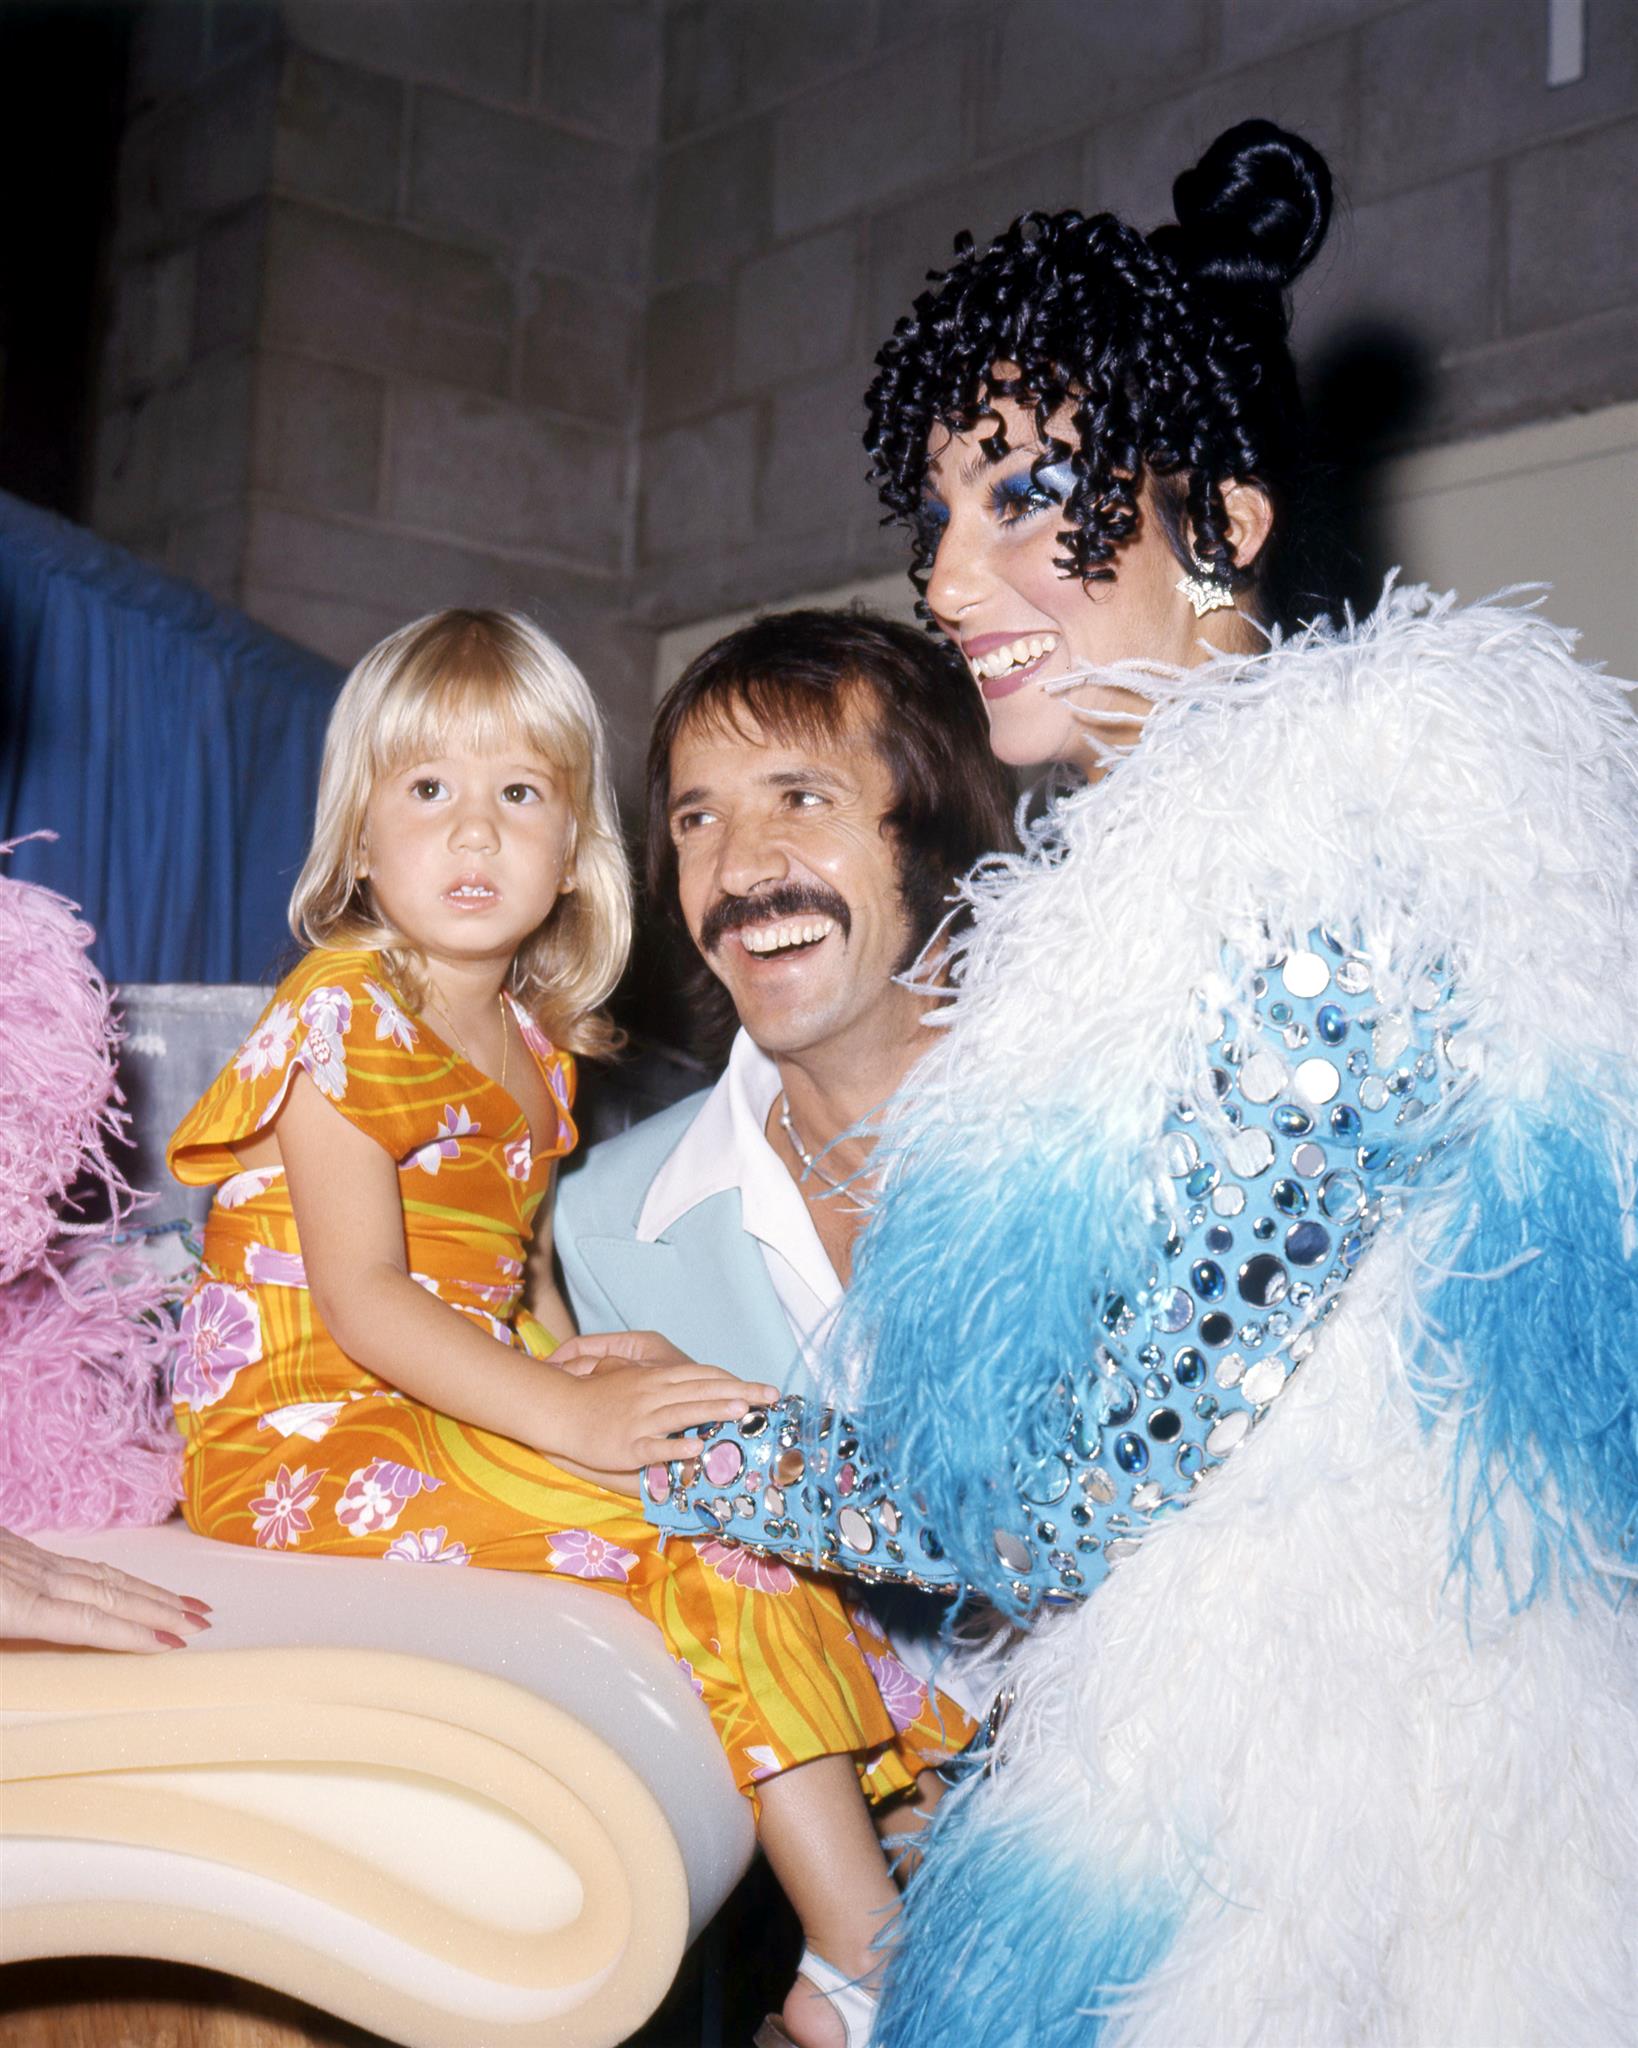 American pop singing duo Sonny & Cher with their daughter Chastity (later Chaz), circa 1973. | Source: Getty Images.